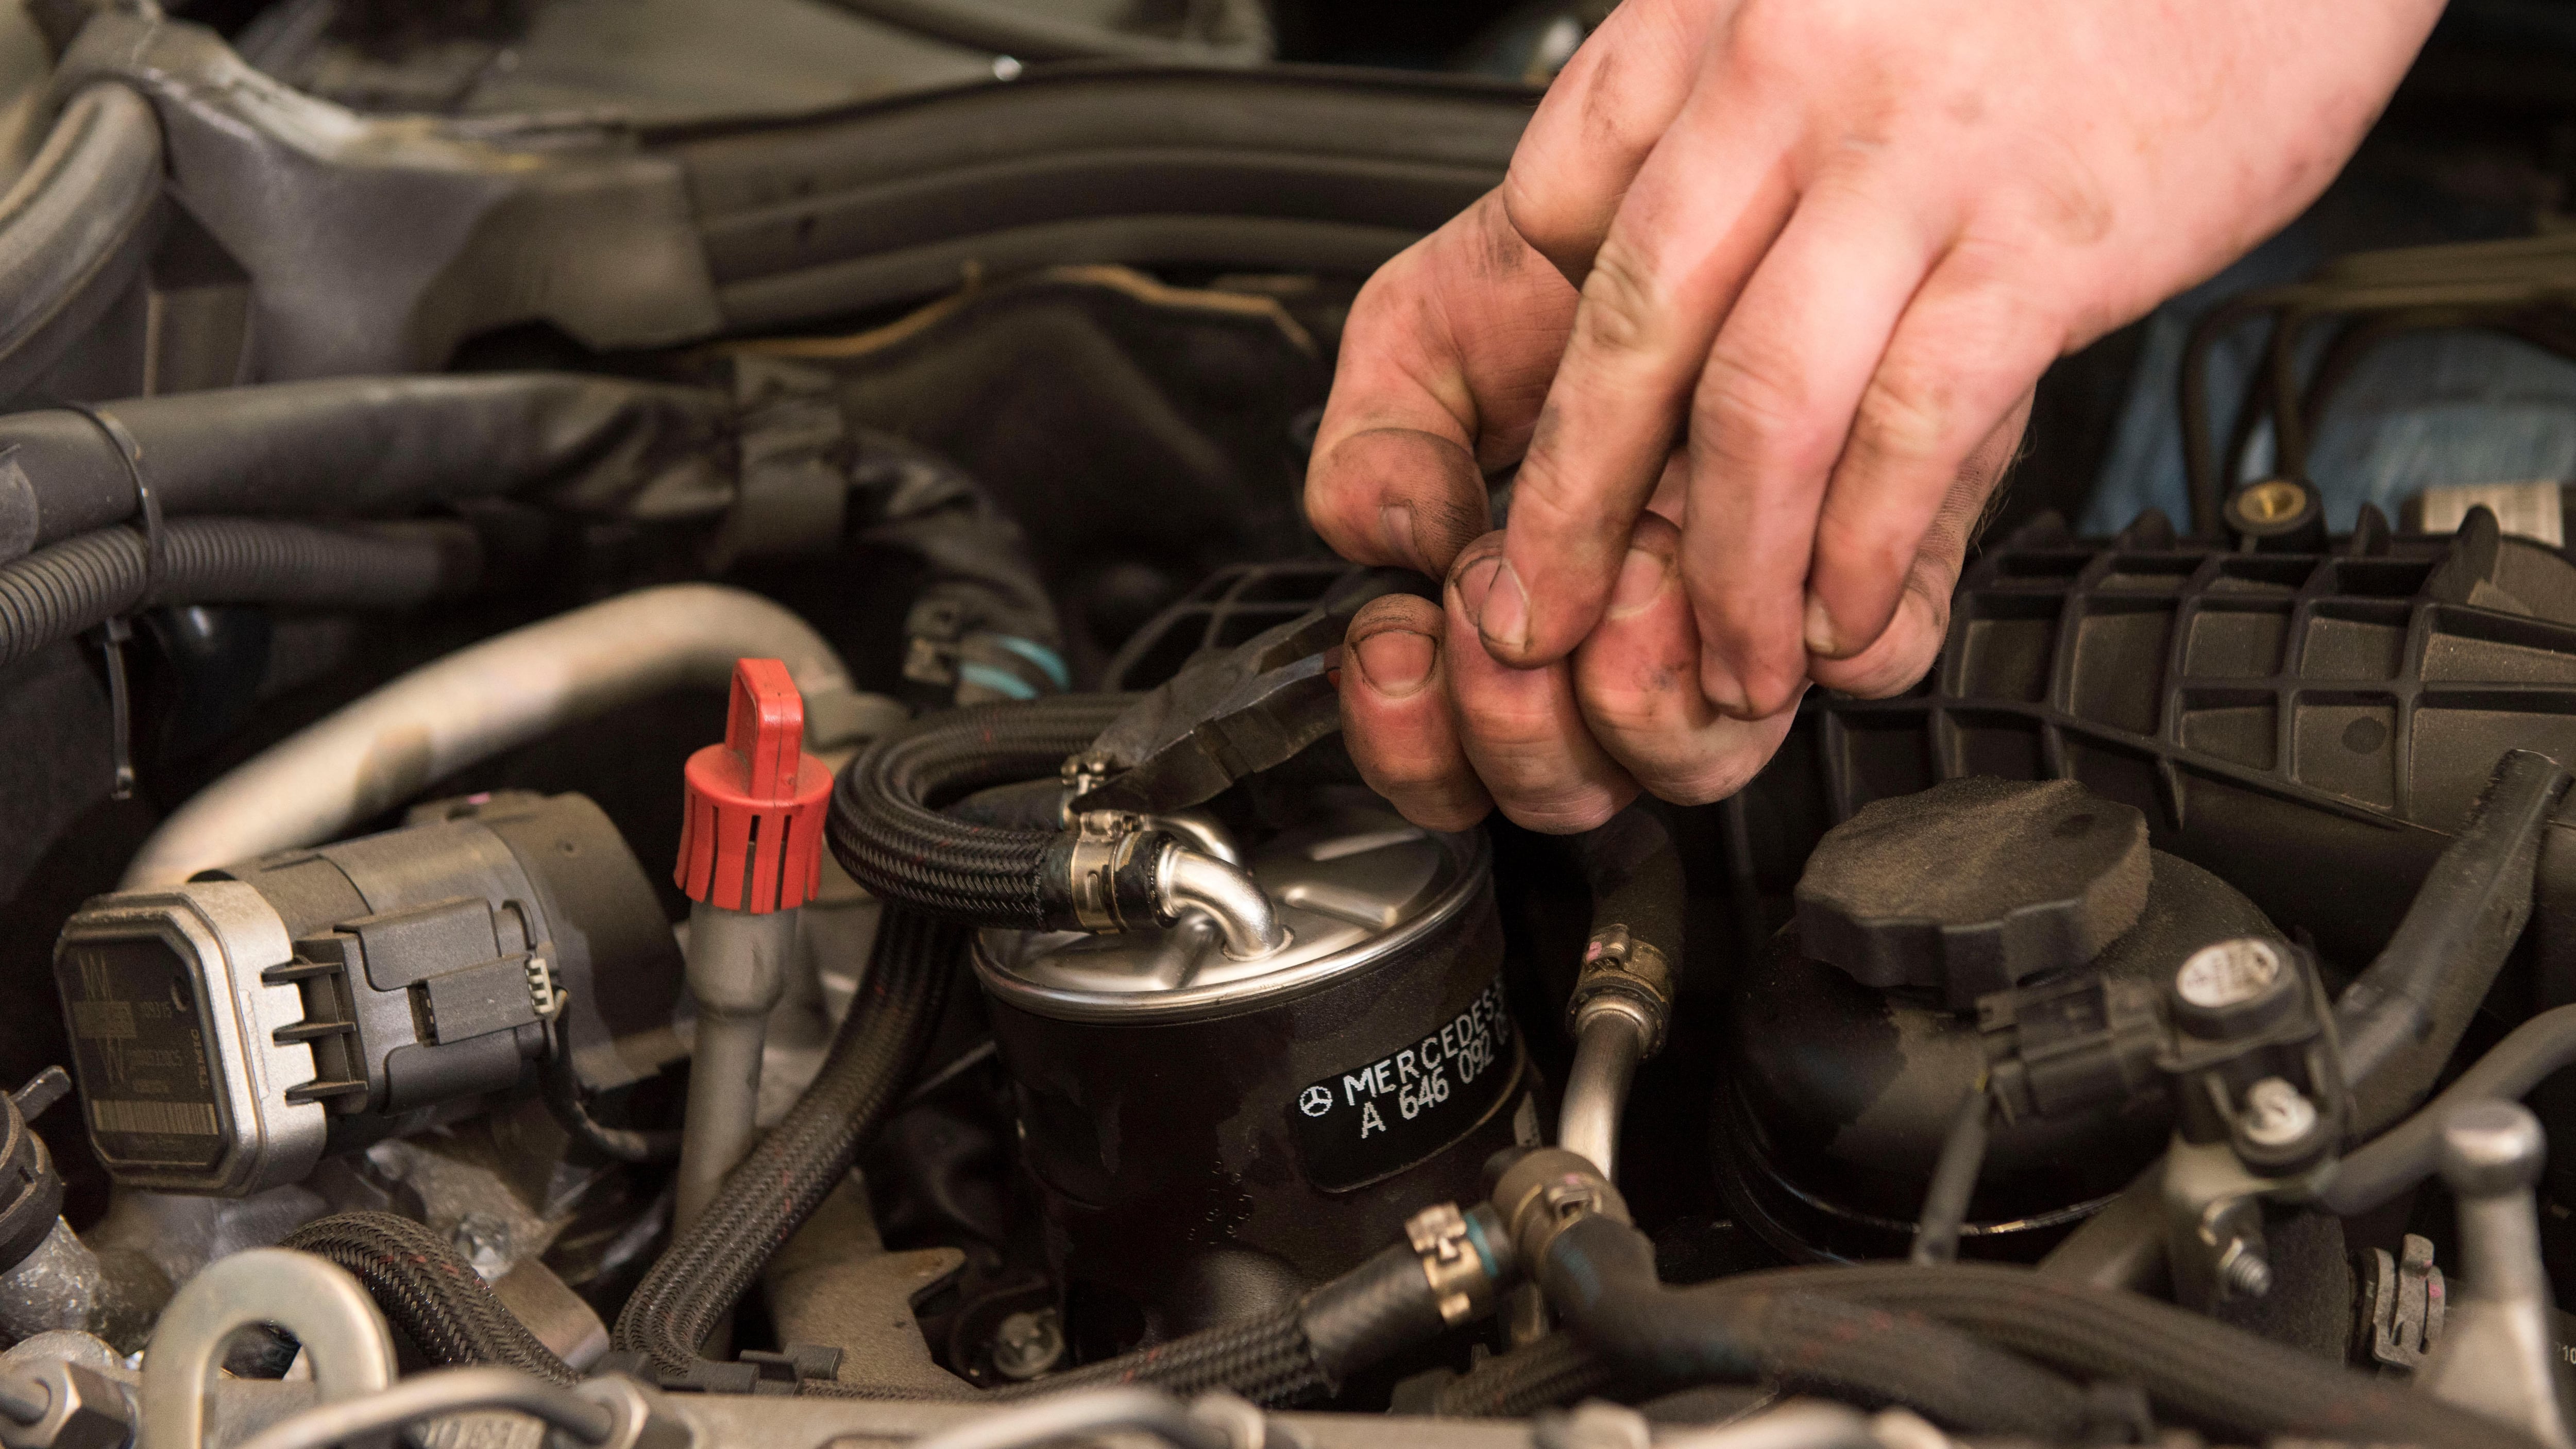 A proposed relaxation of MOT rules has been dropped by the Government